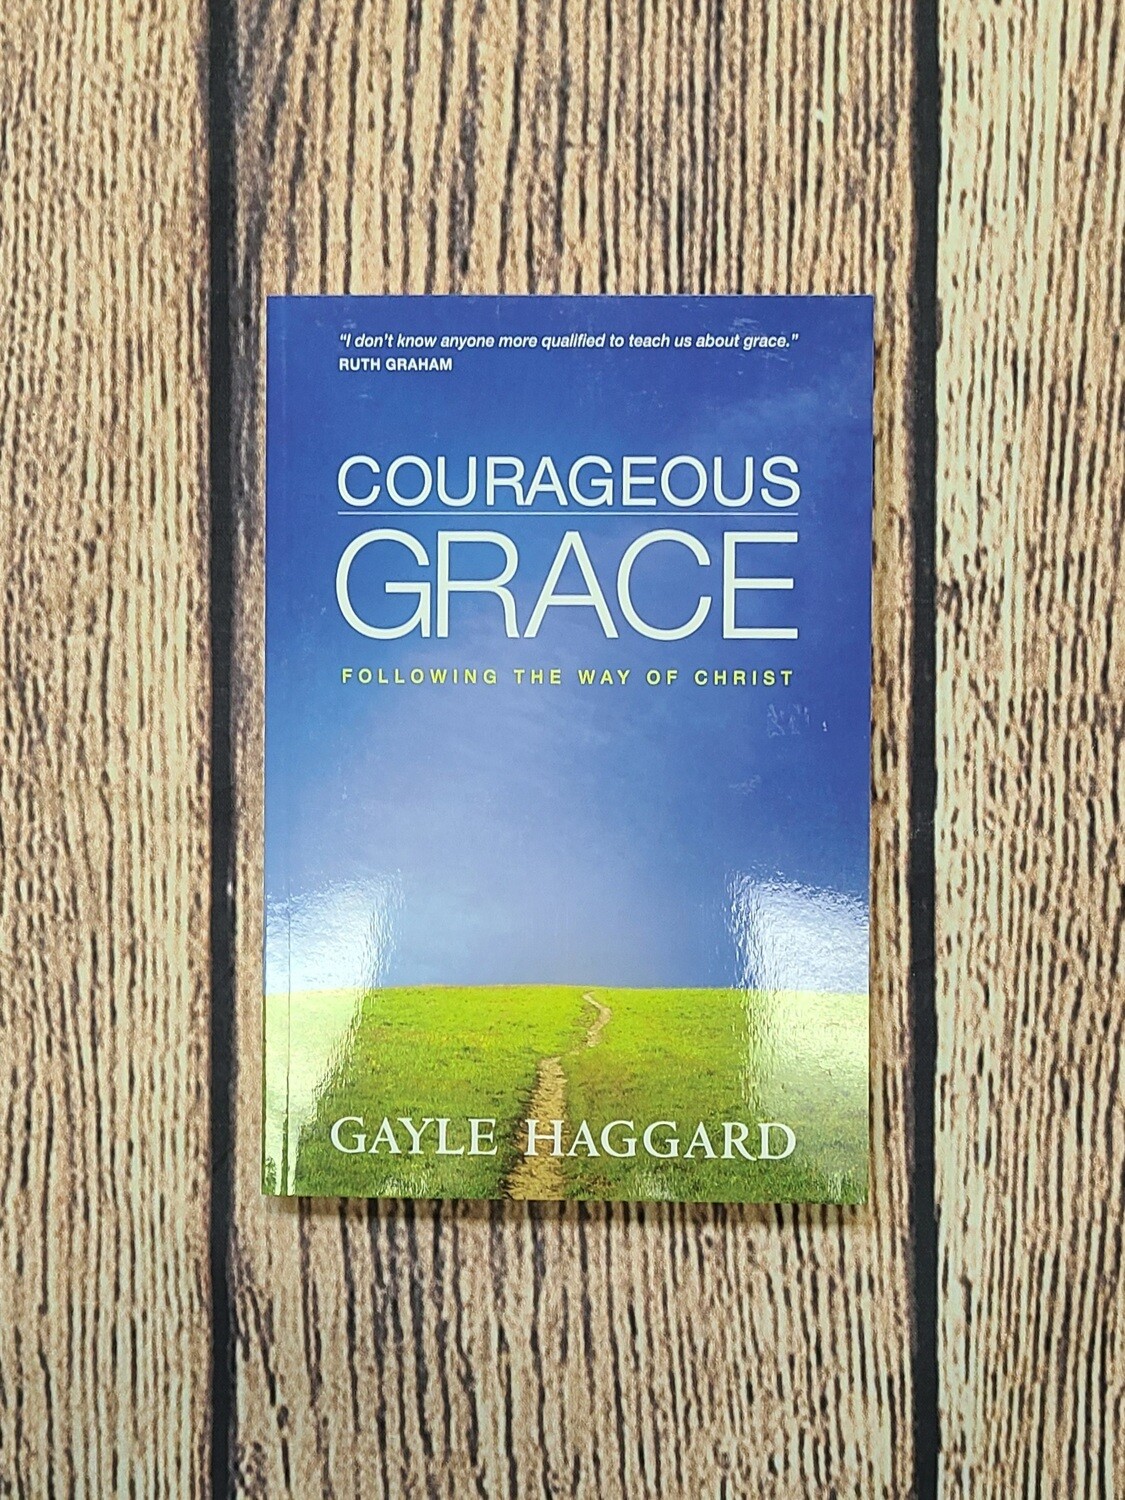 Courageous Grace: Following the Way of Christ by Gayle Haggard